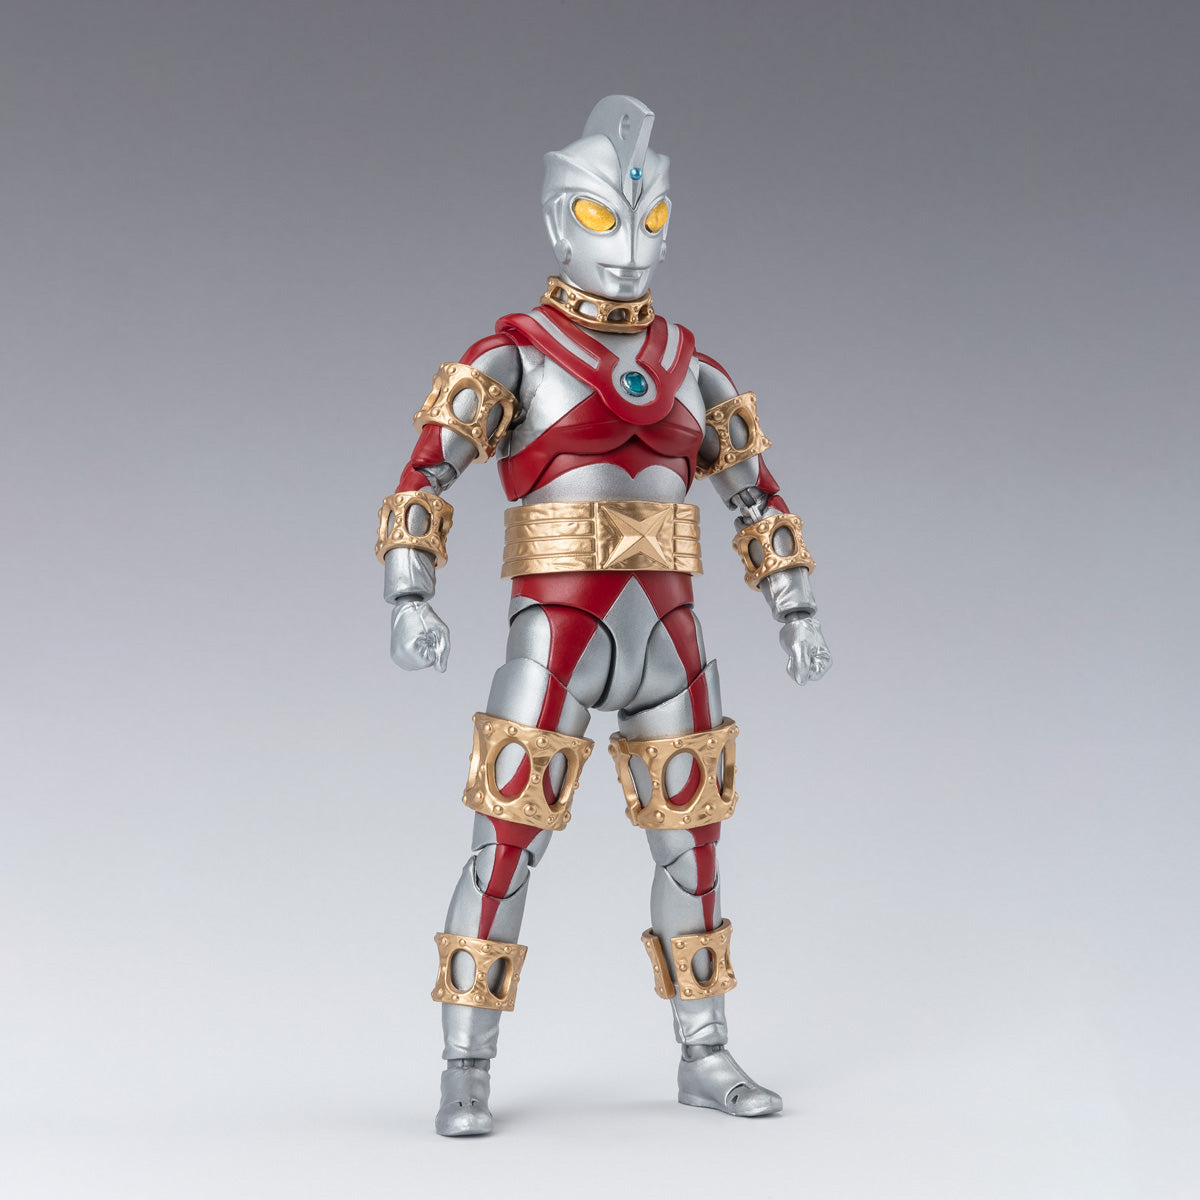 Bandai - S.H.Figuarts - Ultraman Ace - Ace Killer (5 Stars Scattered in the Galaxy) - Marvelous Toys